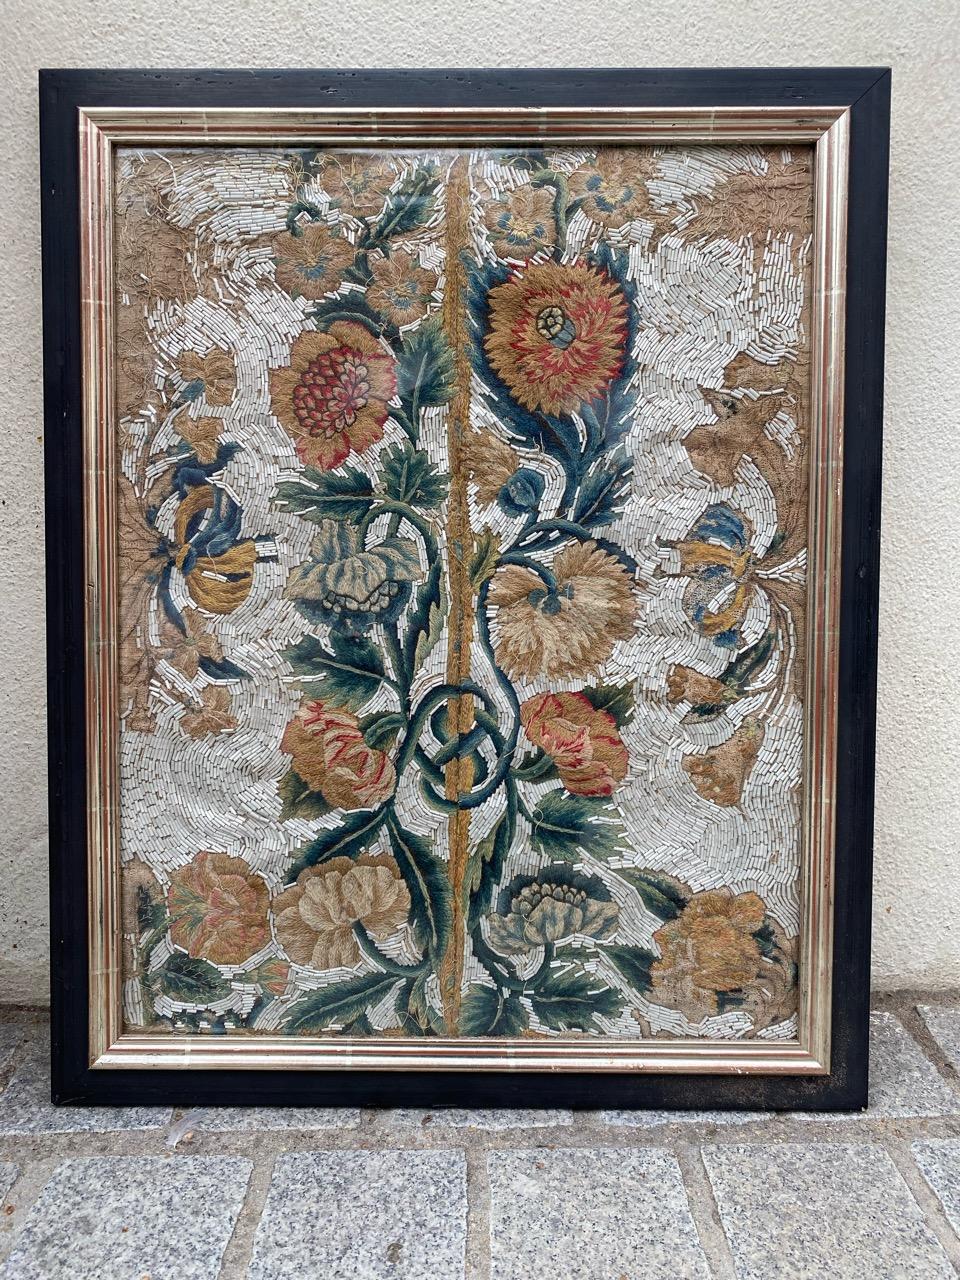 Very beautiful and rare antique embroidery probably french, from the 17th century, with floral design and nice natural colors, embroidered with wool, 

Sizes including the frame : 45 x 56 cm
Only embroidery : 37 x 48 cm.

✨✨✨
